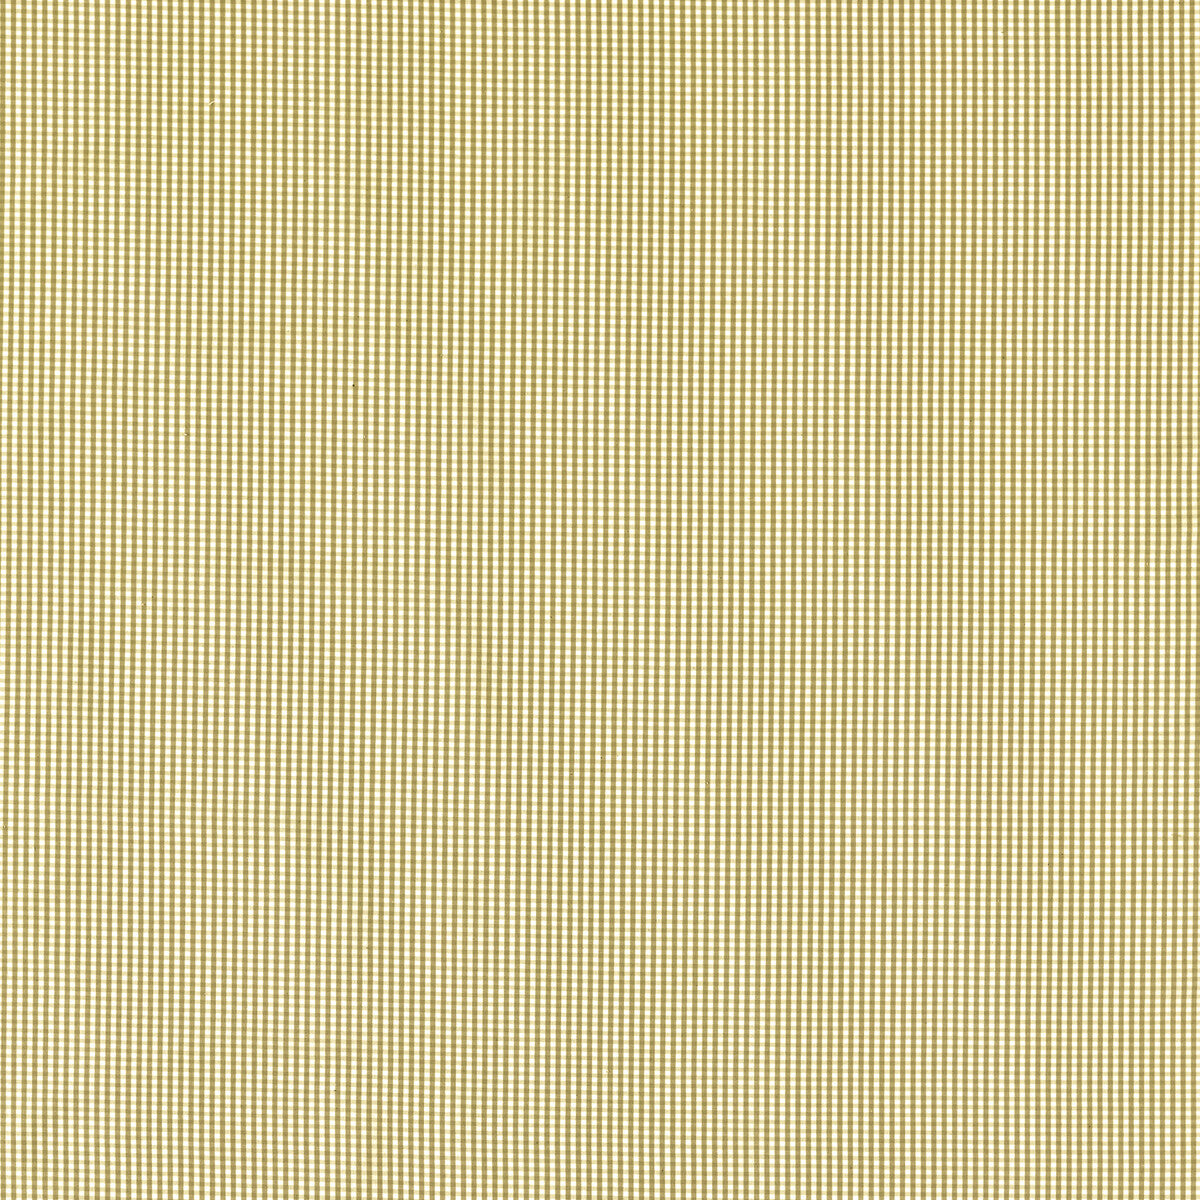 Windsor fabric in ochre color - pattern F1505/07.CAC.0 - by Clarke And Clarke in the Clarke &amp; Clarke Edgeworth collection